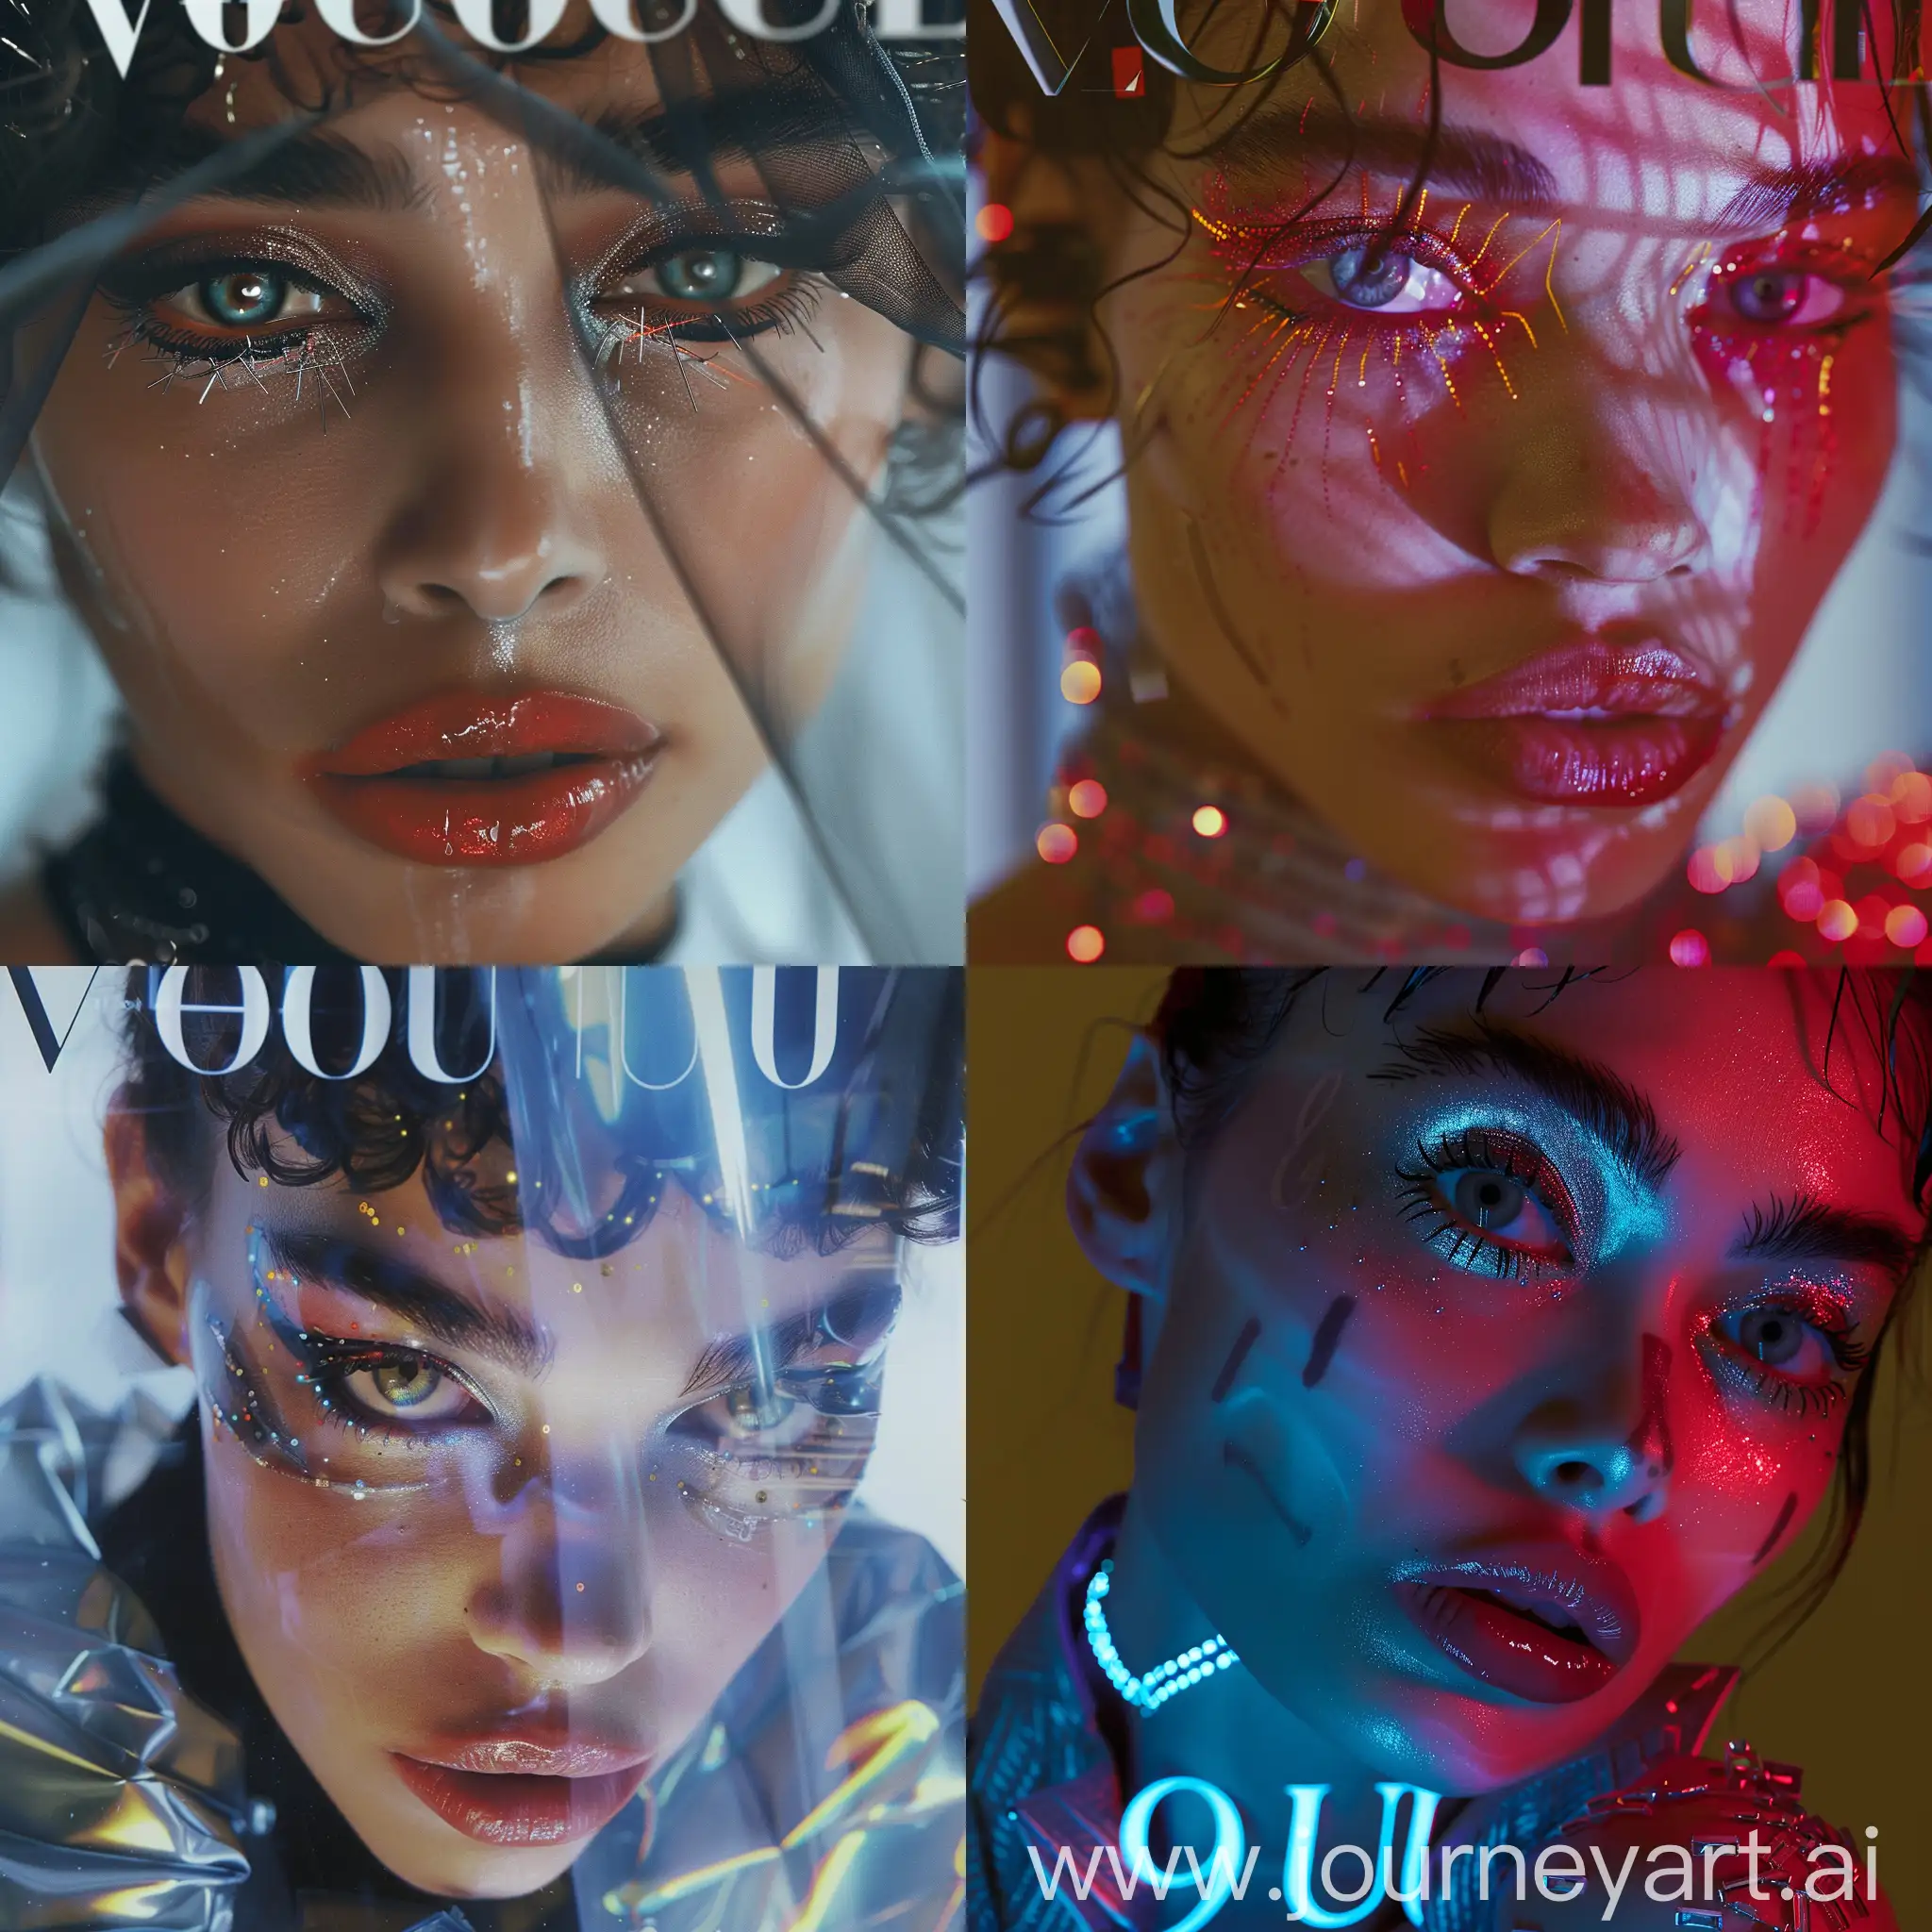 Cyberpunk-Vogue-Cover-Detailed-Portrait-of-a-Mysterious-Woman